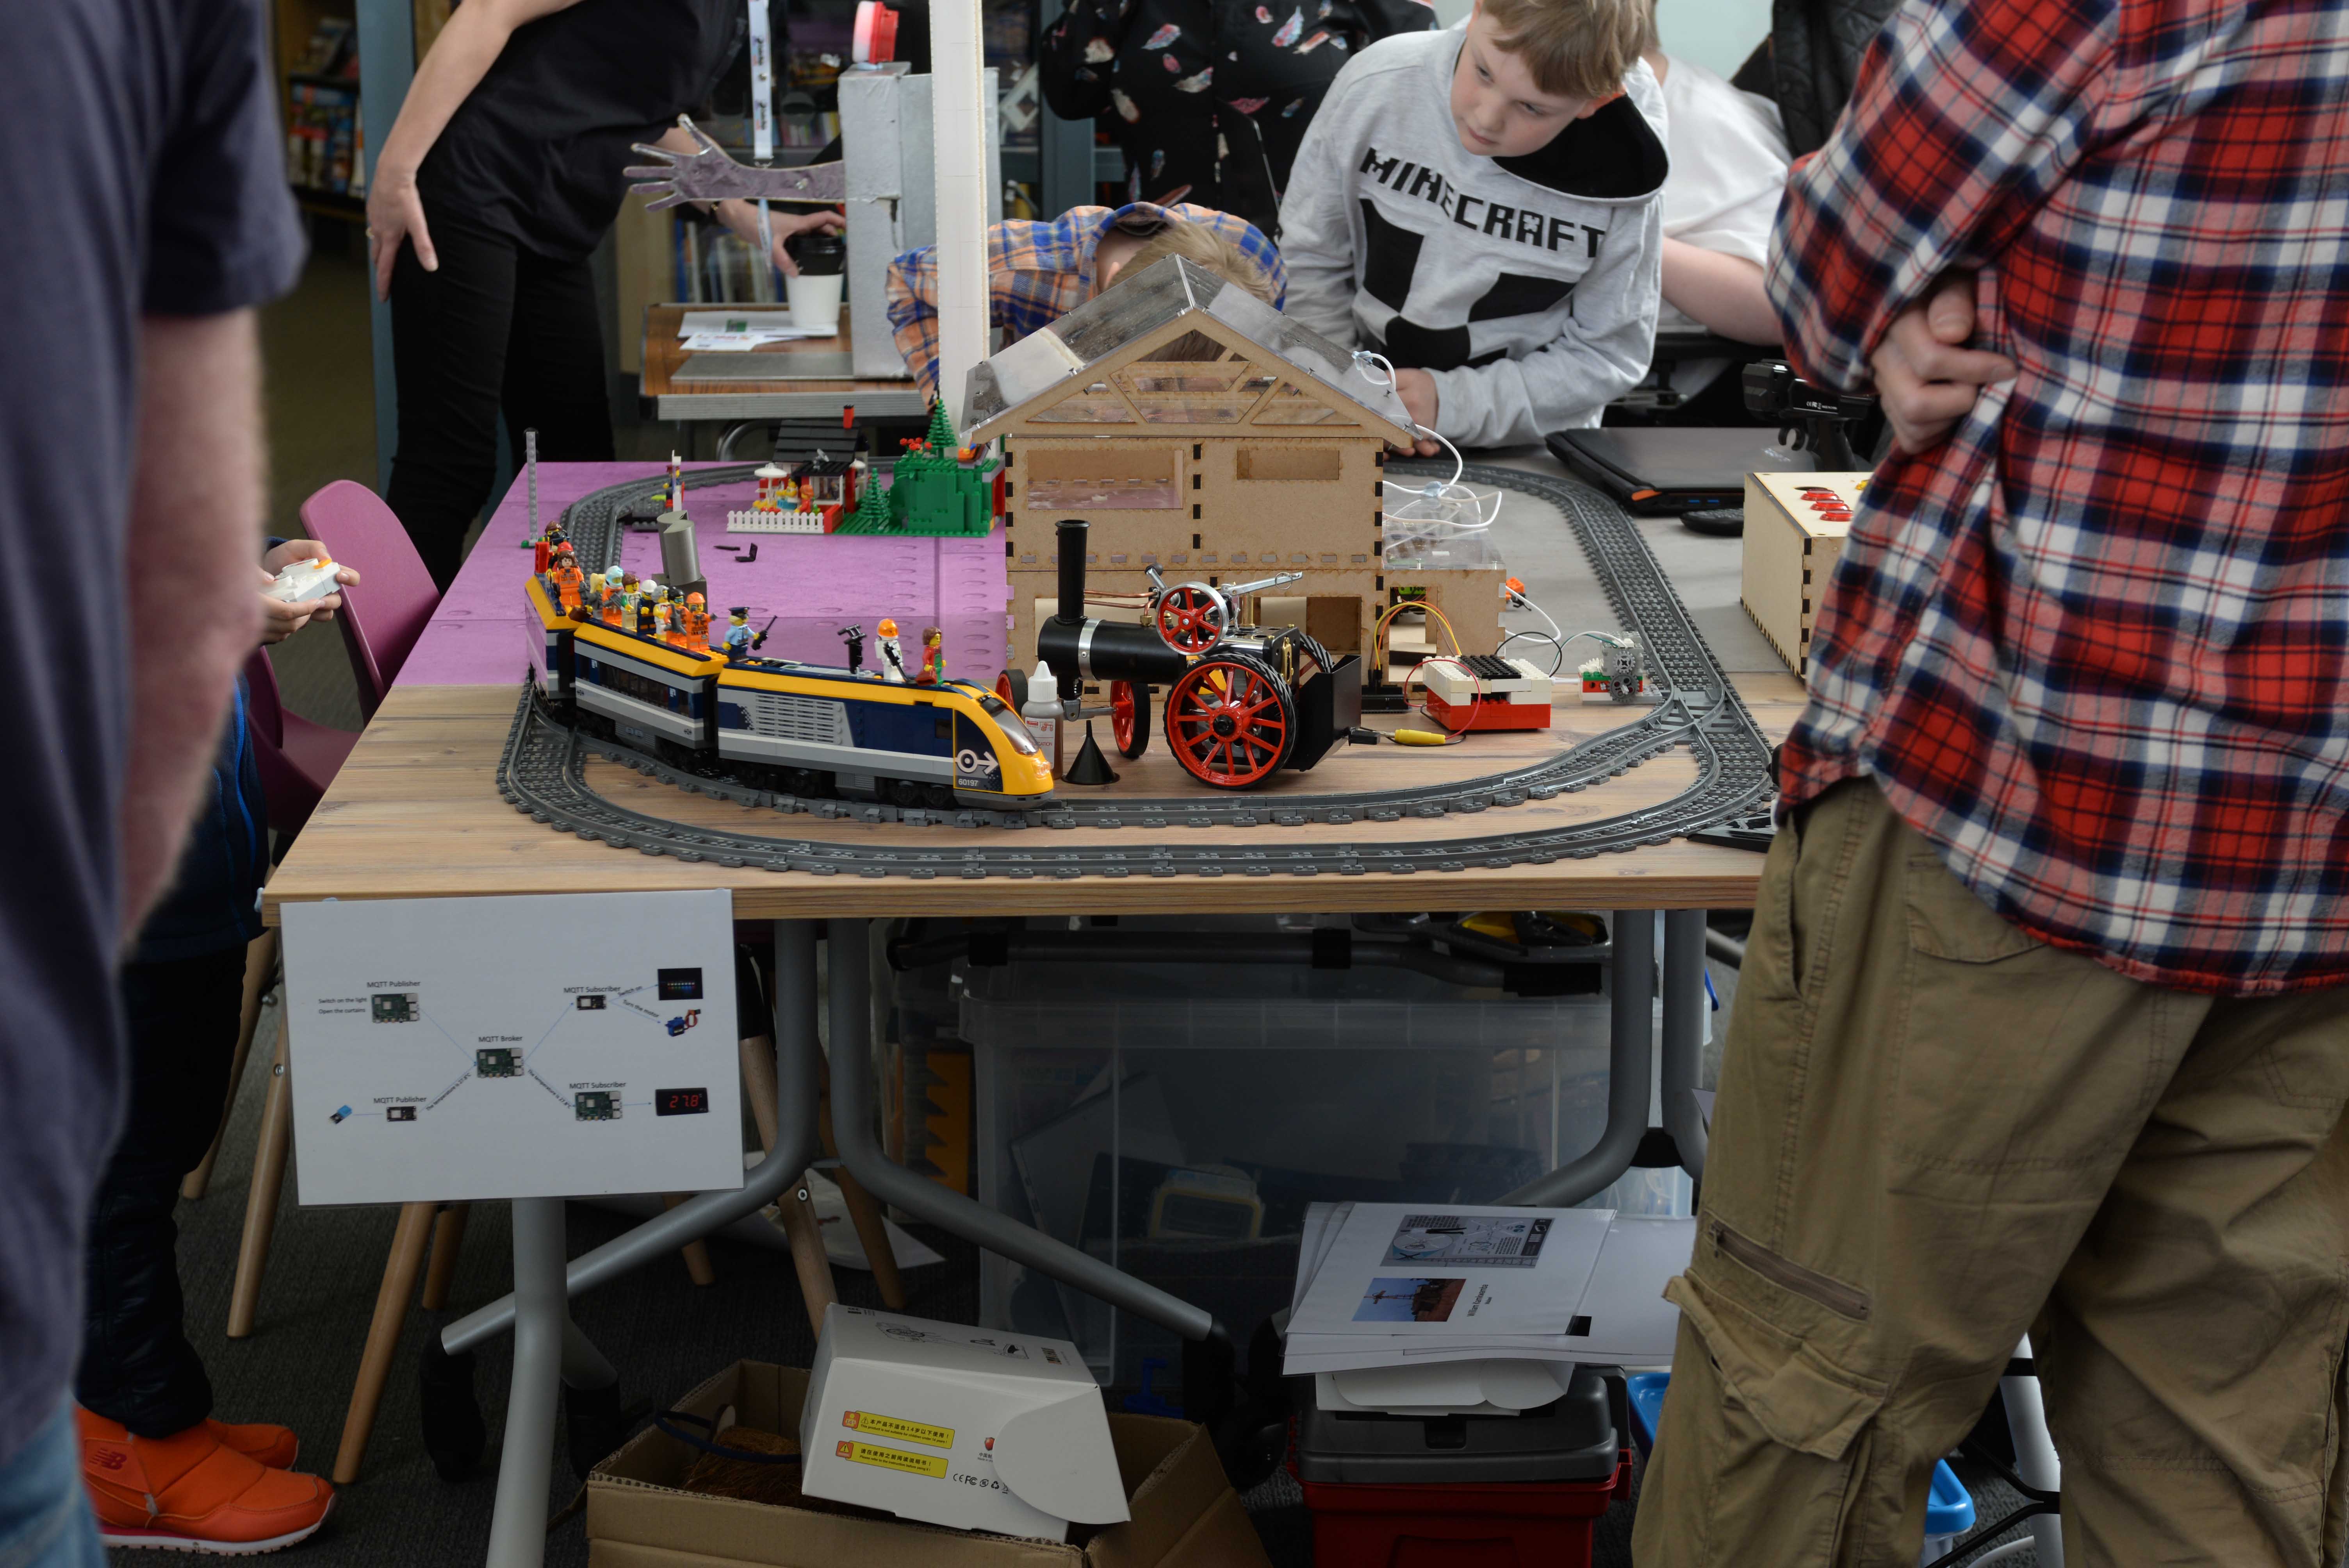 Children's MakerPlace tables with Lego electric train